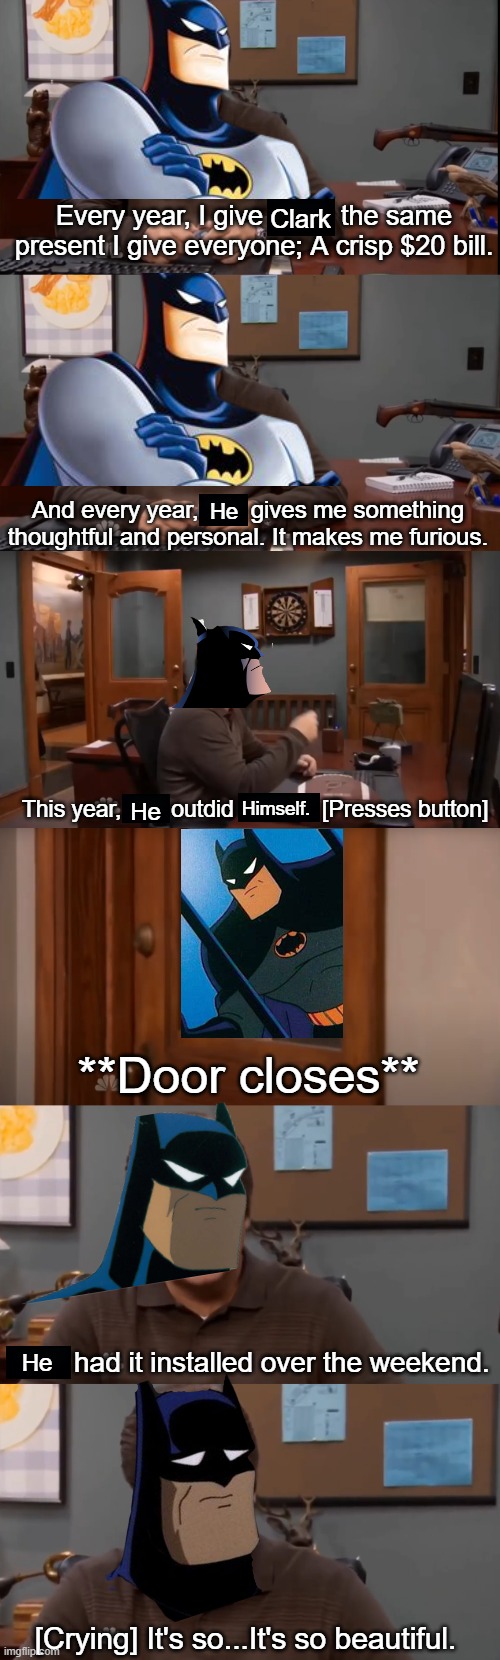 Ron Swanson automatic door scene (blank) | Clark; He; Himself. He; He | image tagged in ron swanson automatic door scene blank,batman and superman,batman,memes | made w/ Imgflip meme maker